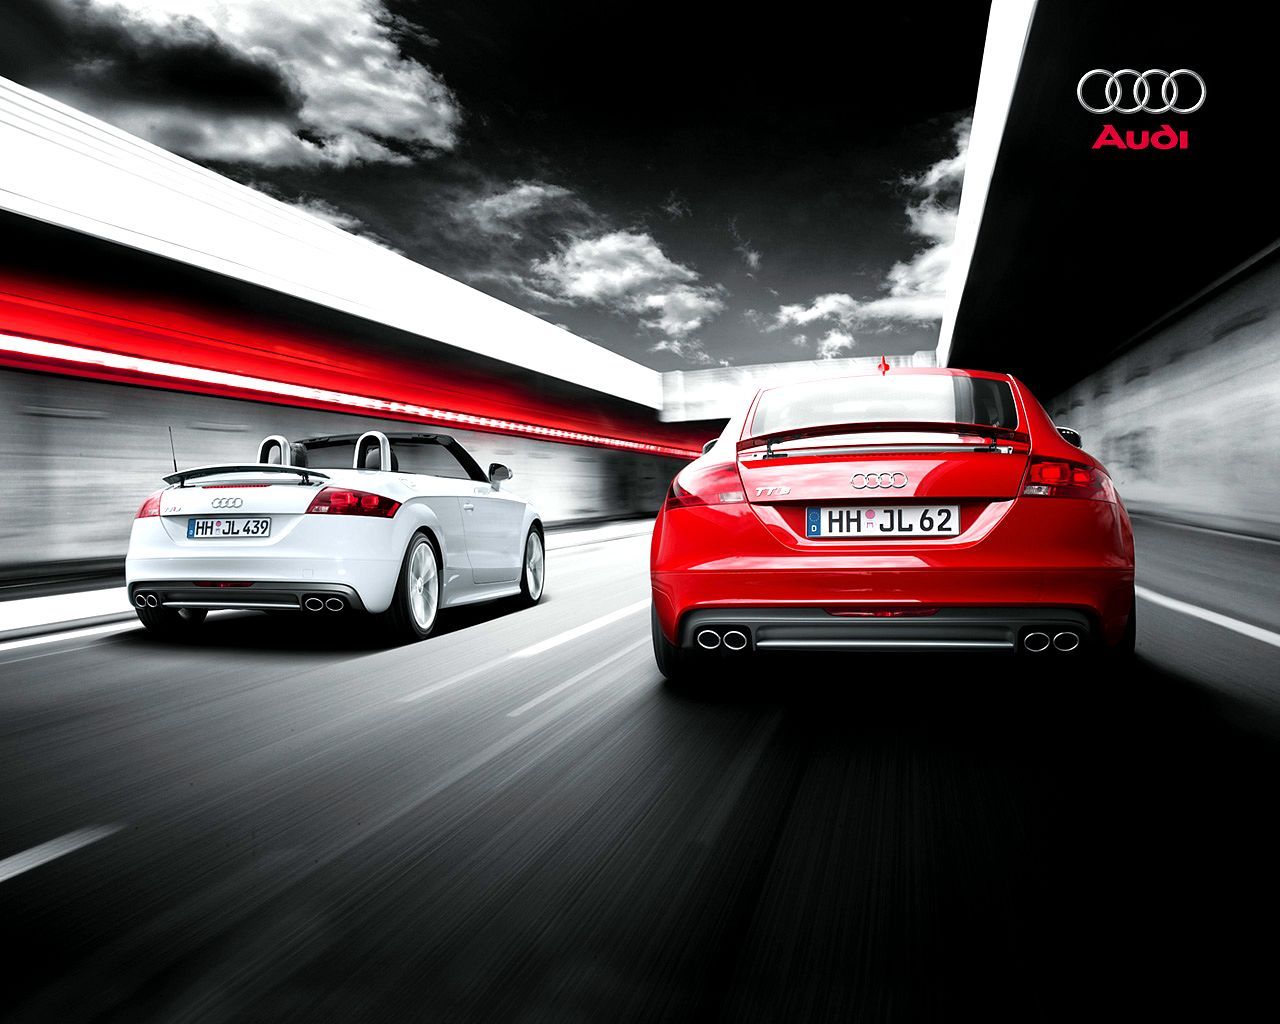 Audi HD Wallpapers and Backgrounds